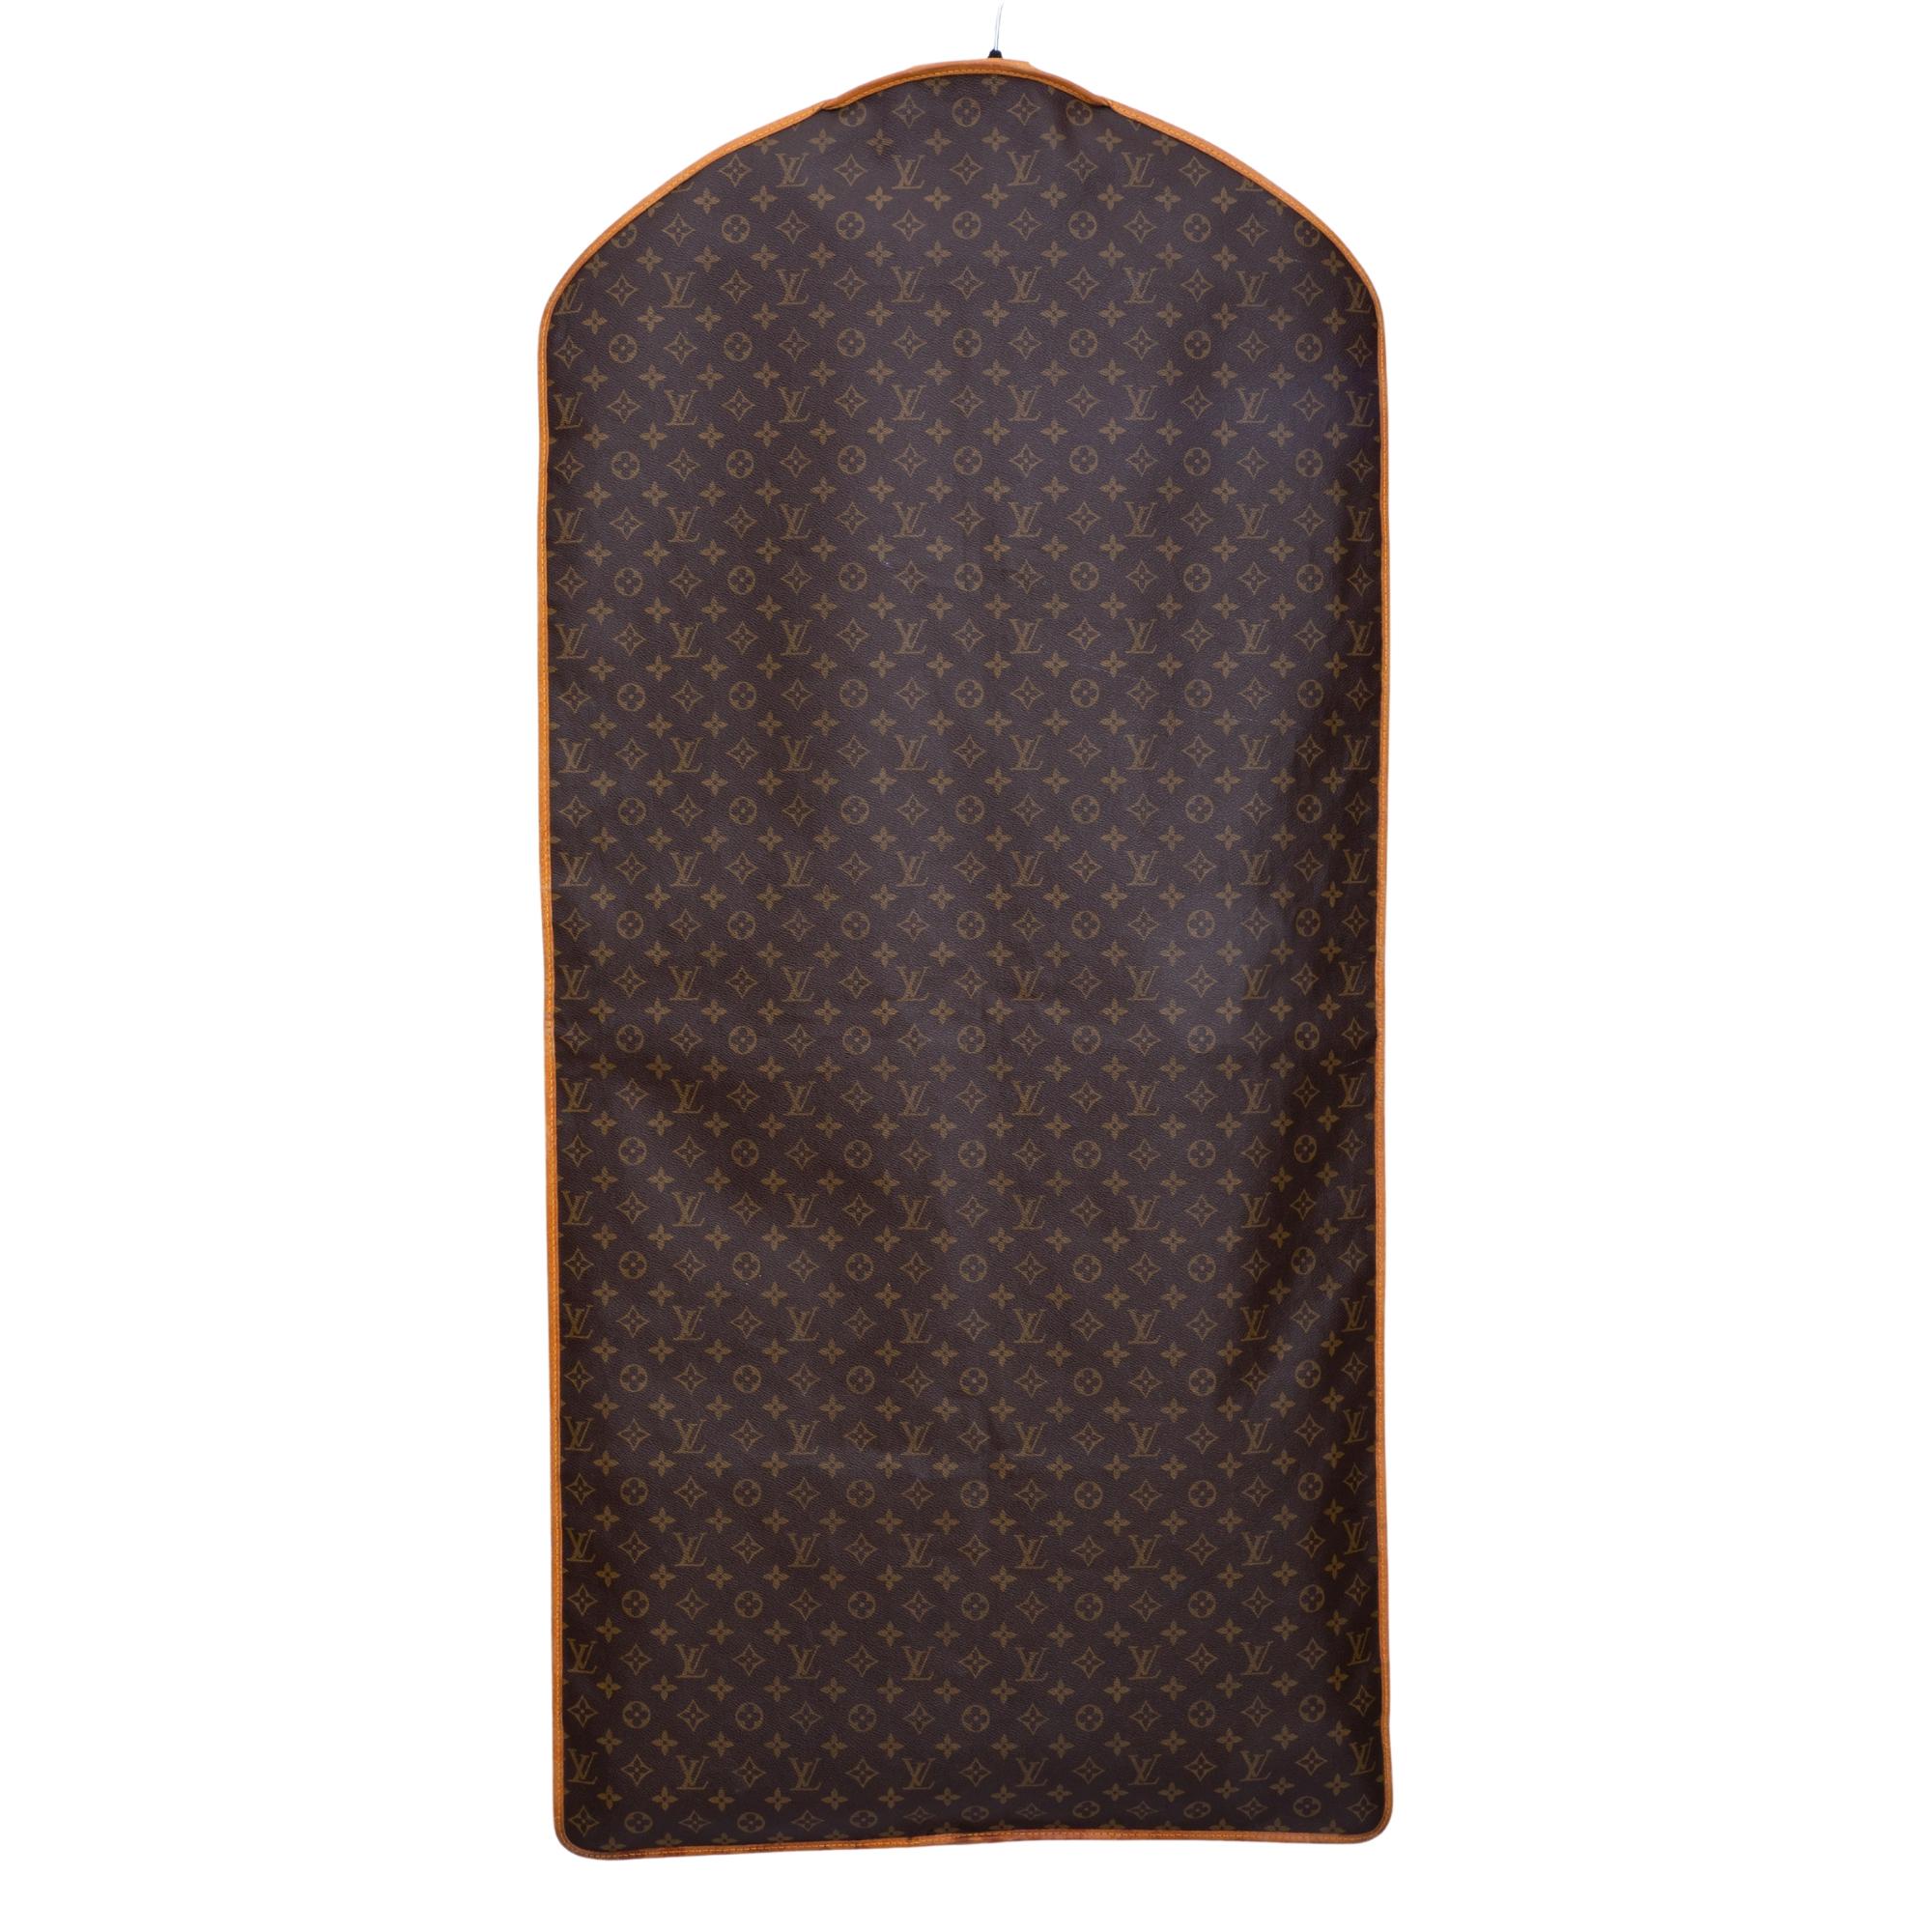 This garment bag carrier is constructed of Louis Vuitton Monogram on toile canvas. The garment bag features leather trim around the periphery, a long zipper up the center and the interior is a fine brown fabric.

COLOR: Brown
MATERIAL: Coated